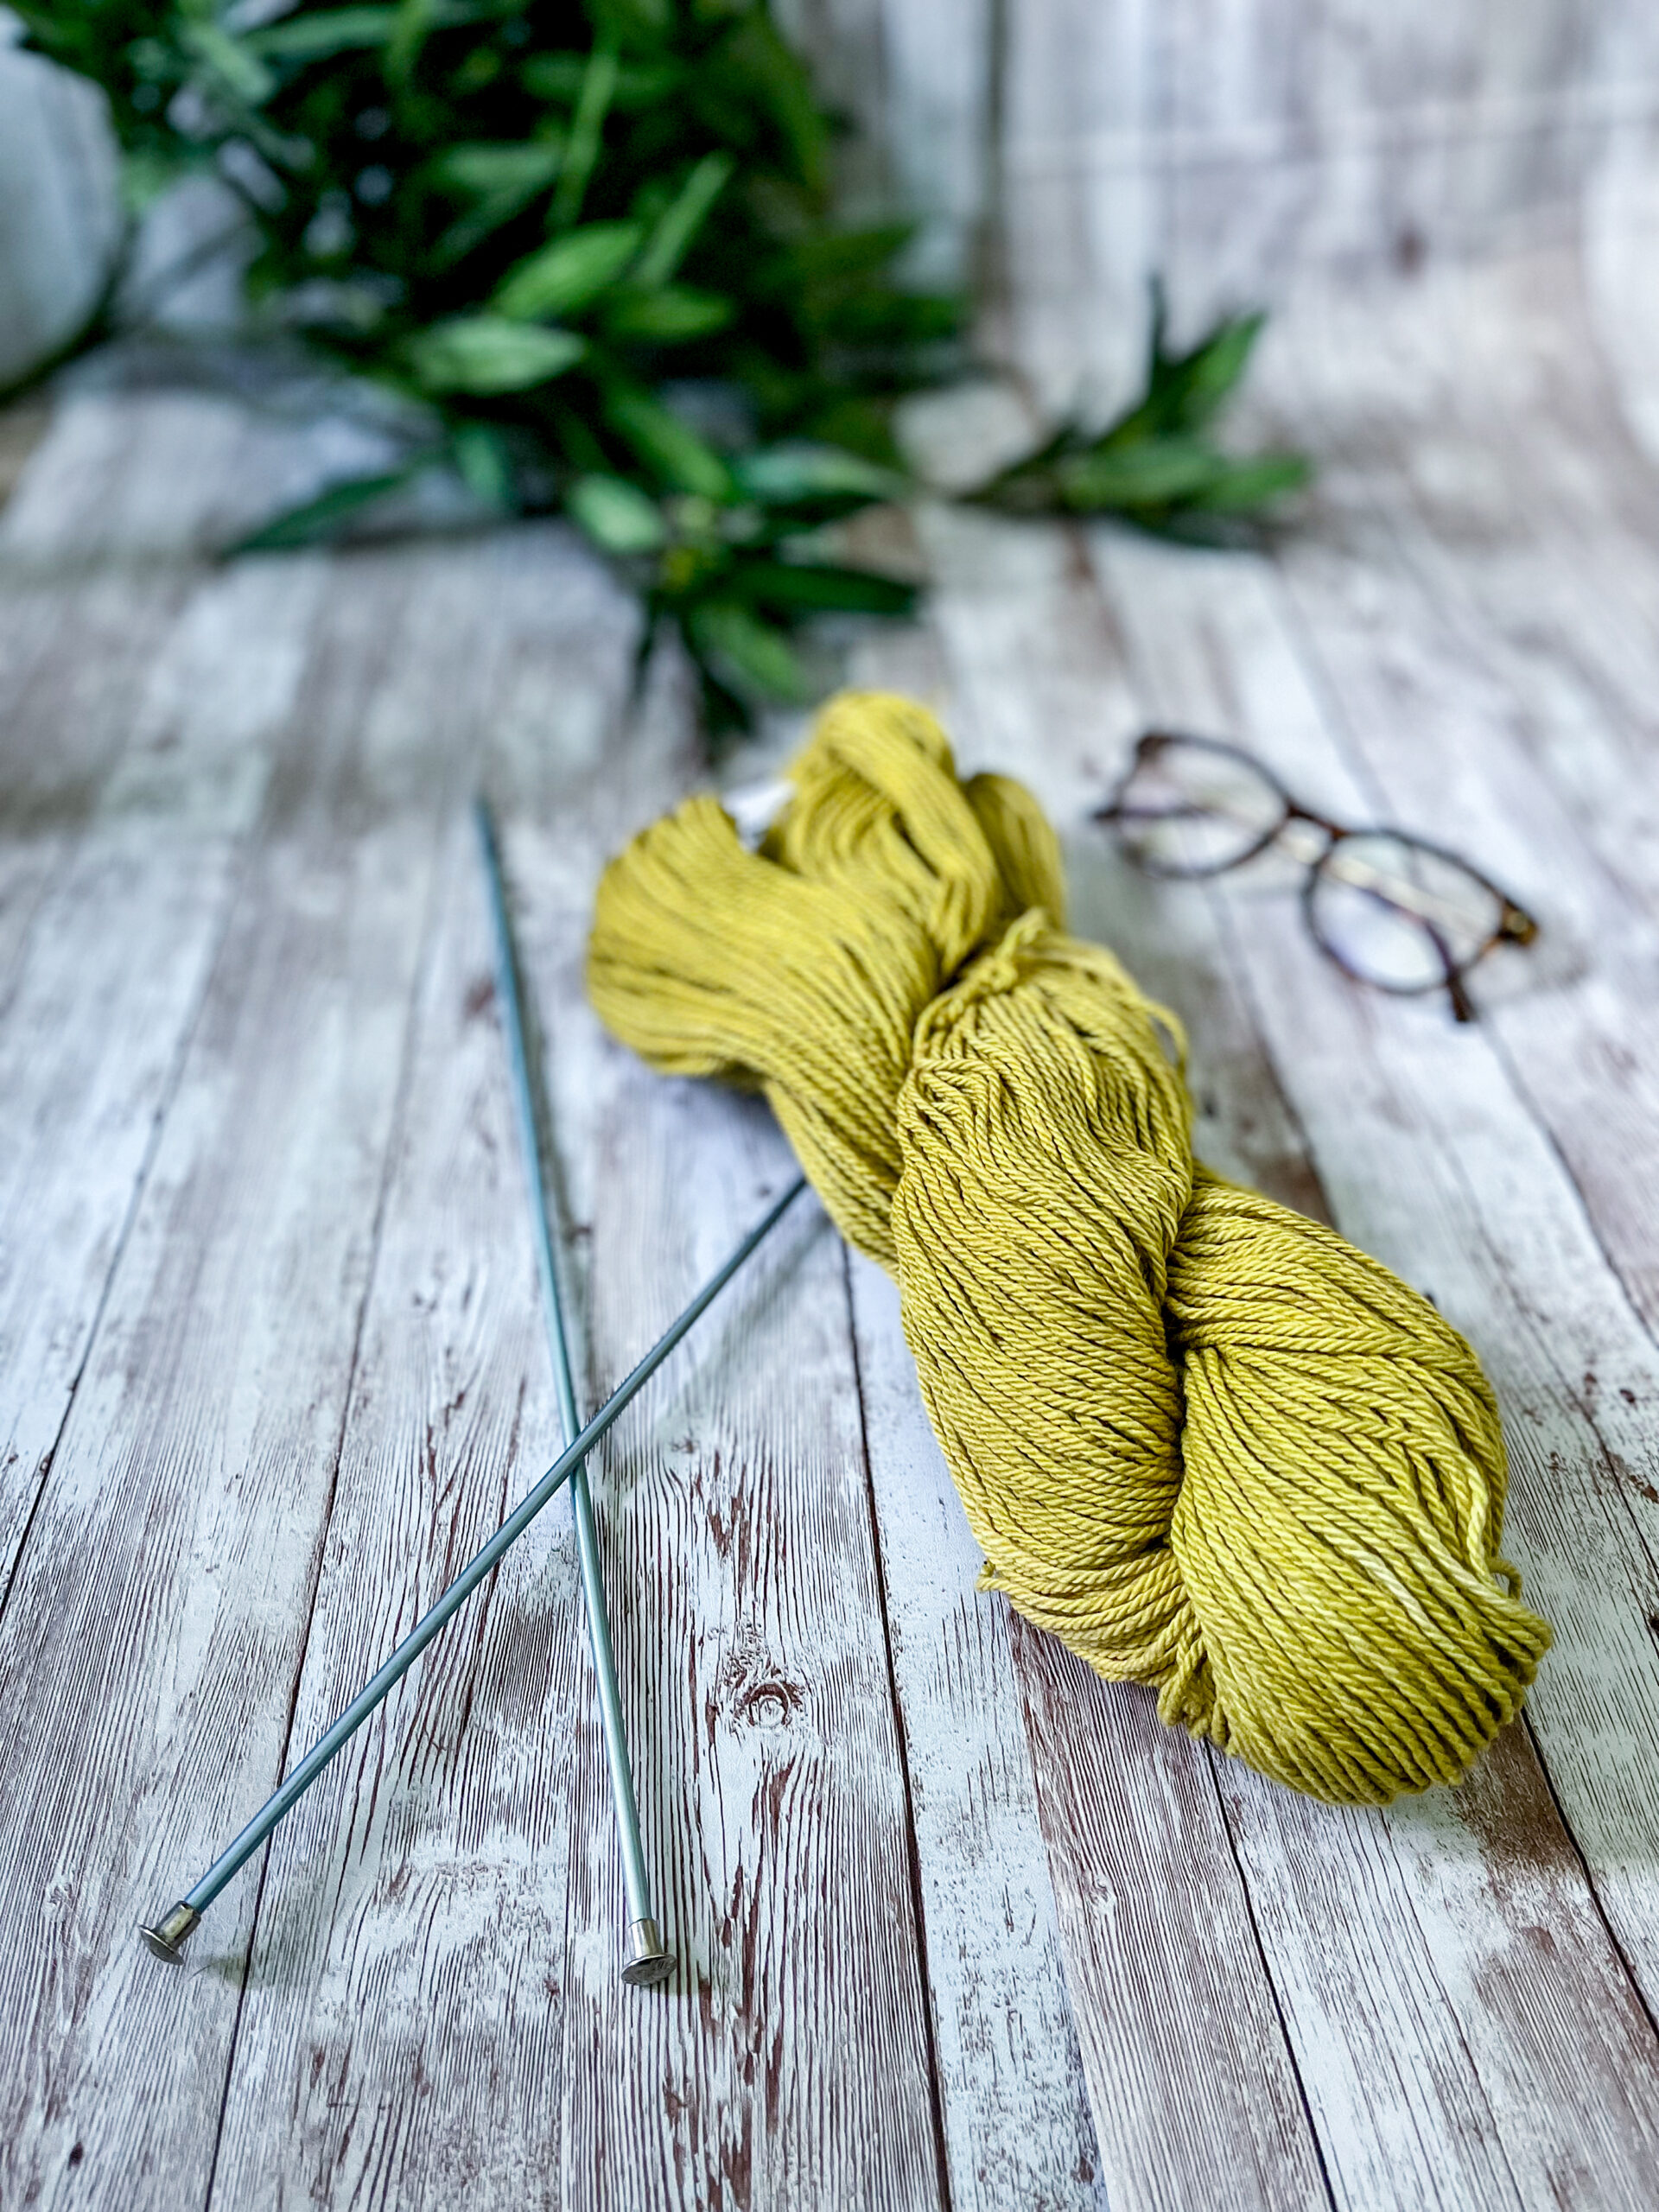 A skein of mustard yellow Virginia-grown cotton rests on a wood panel, with a pair of knitting needles, reading glasses and greenery around it